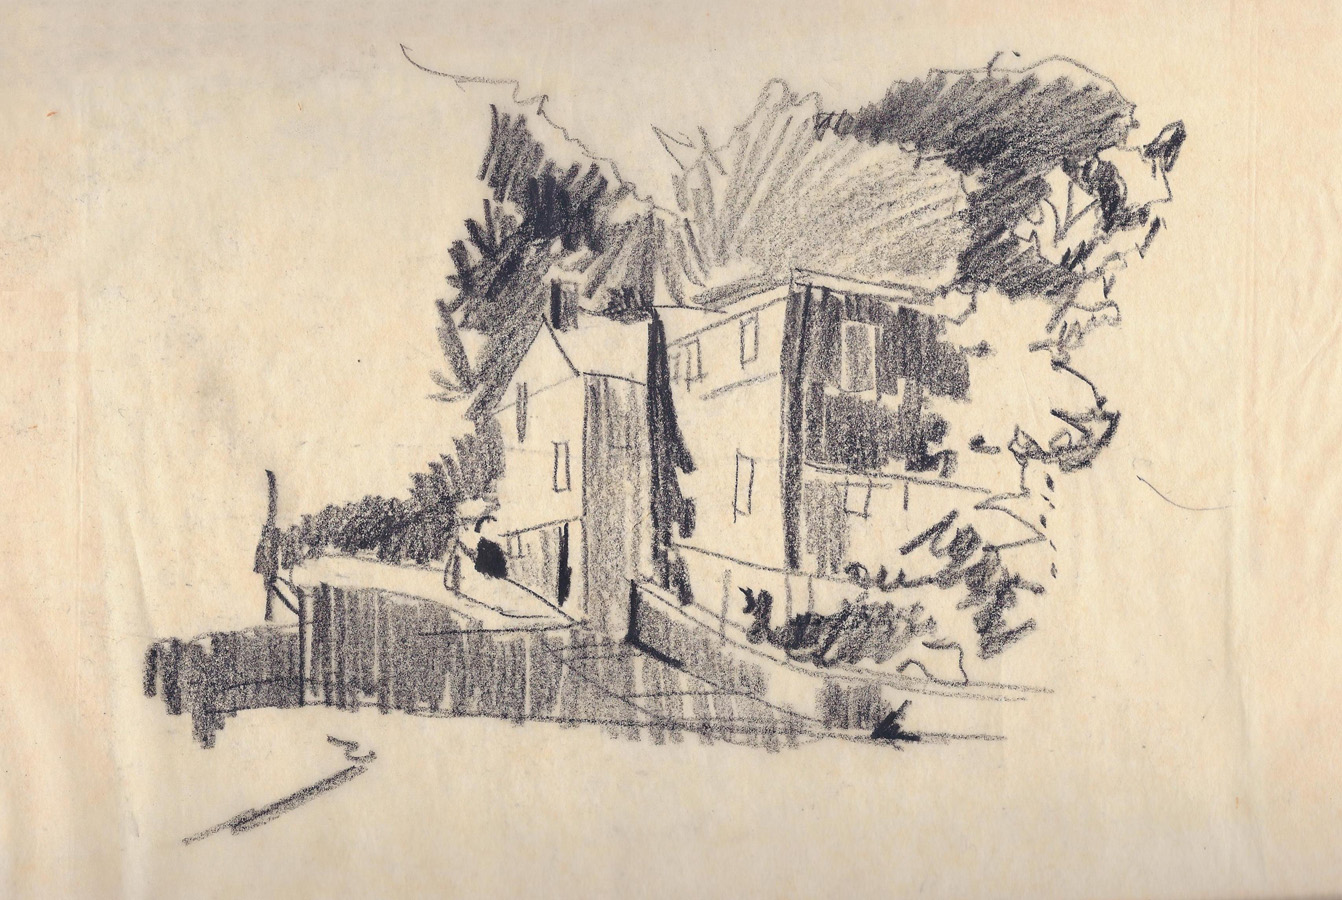 A pencil sketch of a house